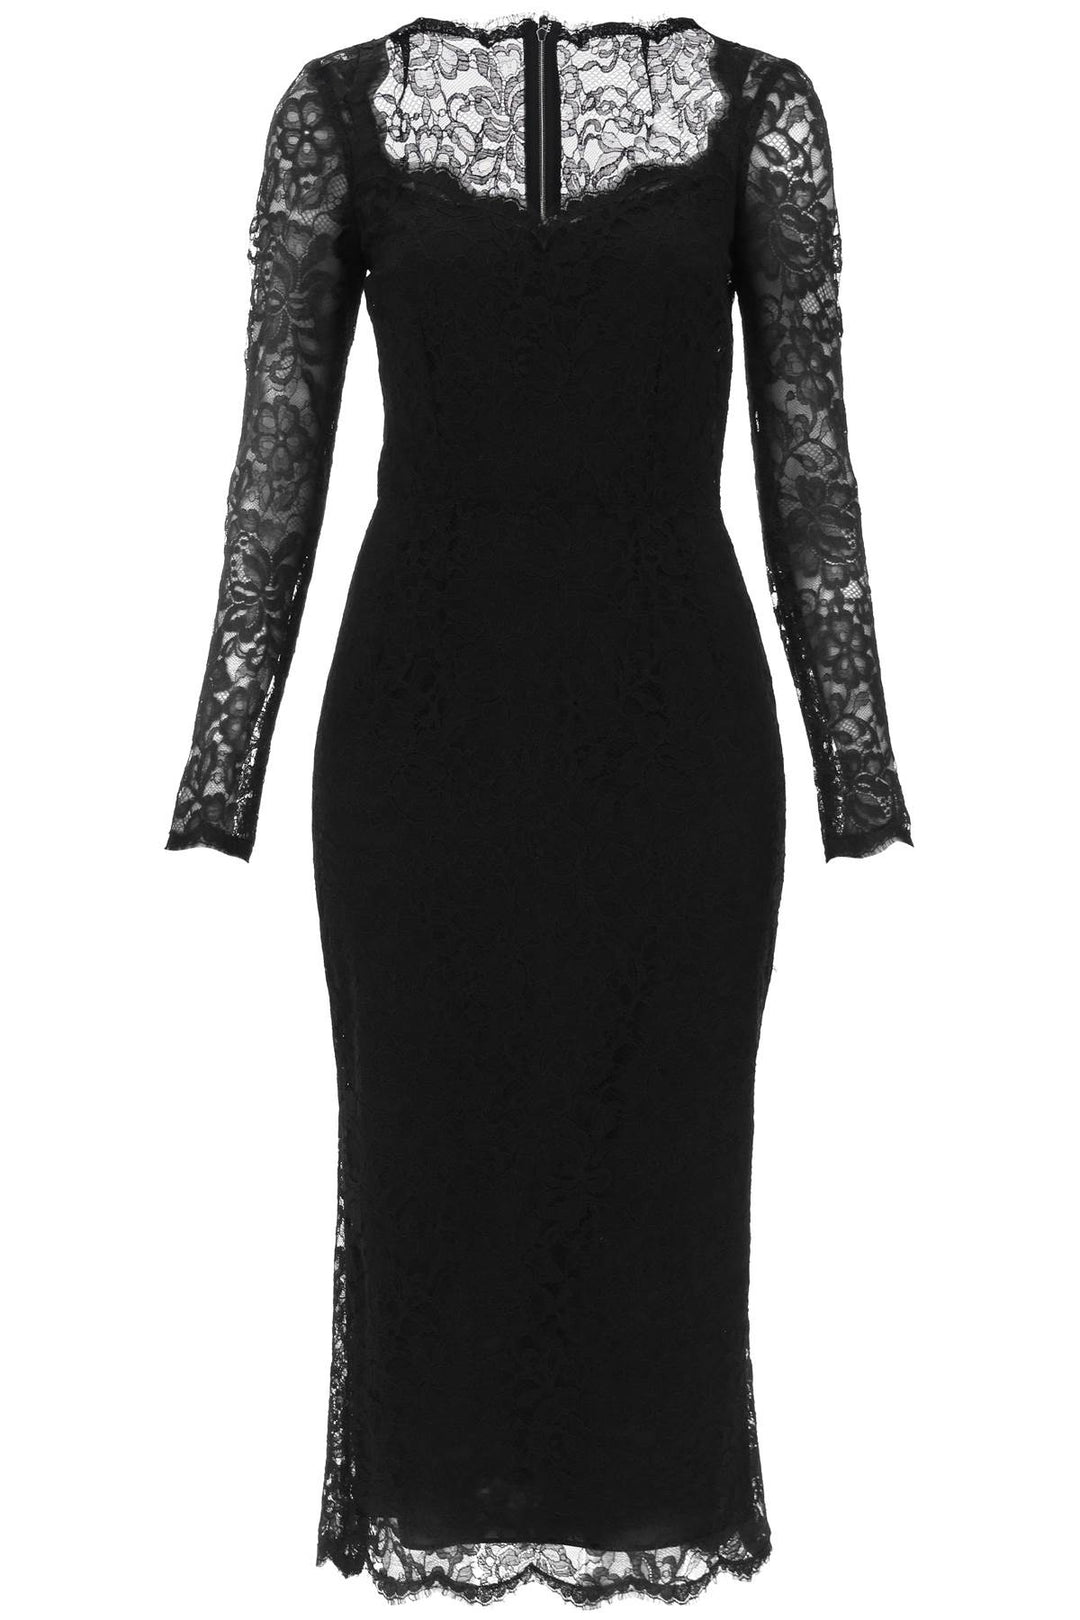 Dolce & Gabbana Midi Dress In Floral Chantilly Lace   Nero